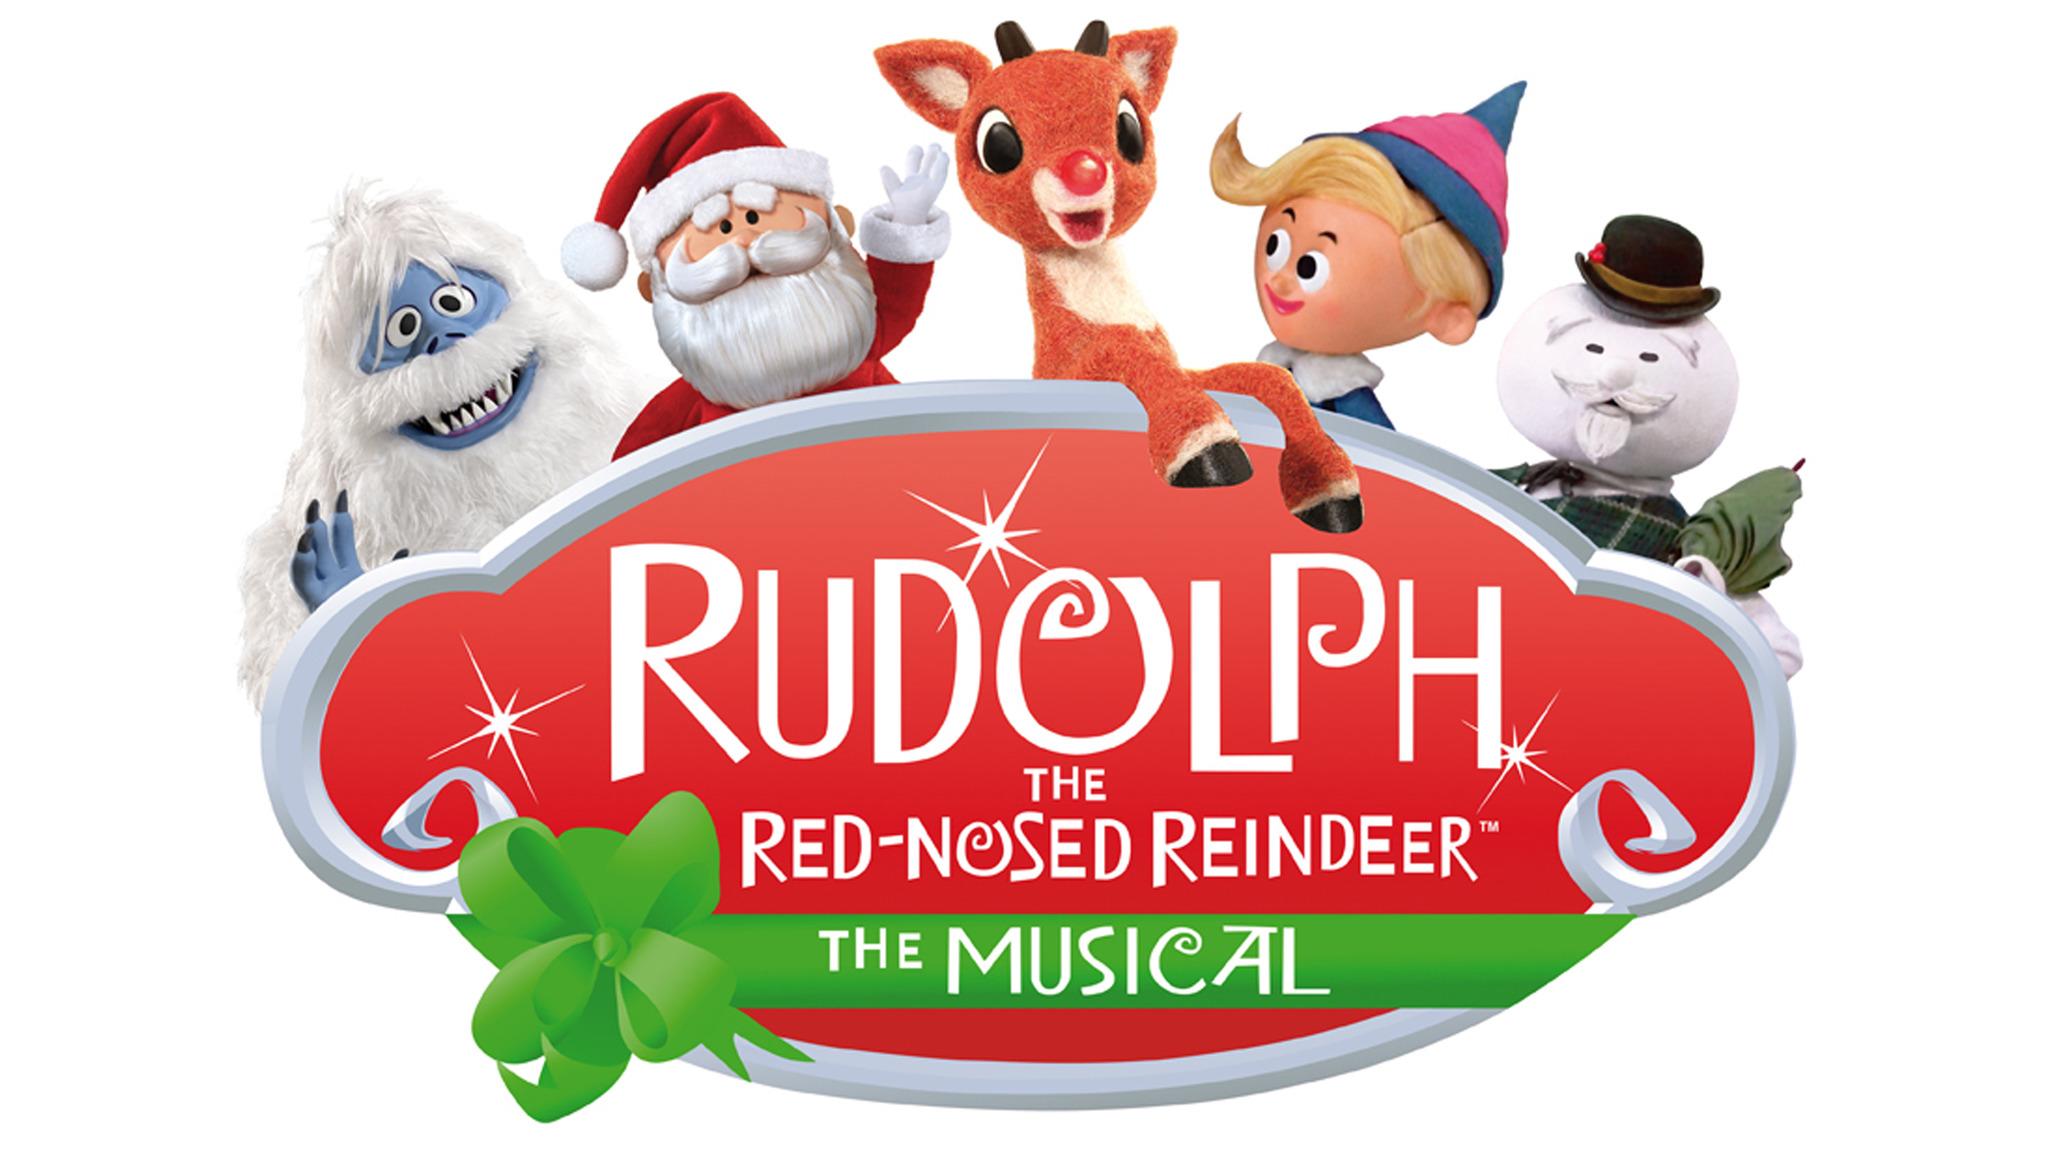 working presale password for Rudolph The Red-Nosed Reindeer face value tickets in Utica at The Stanley